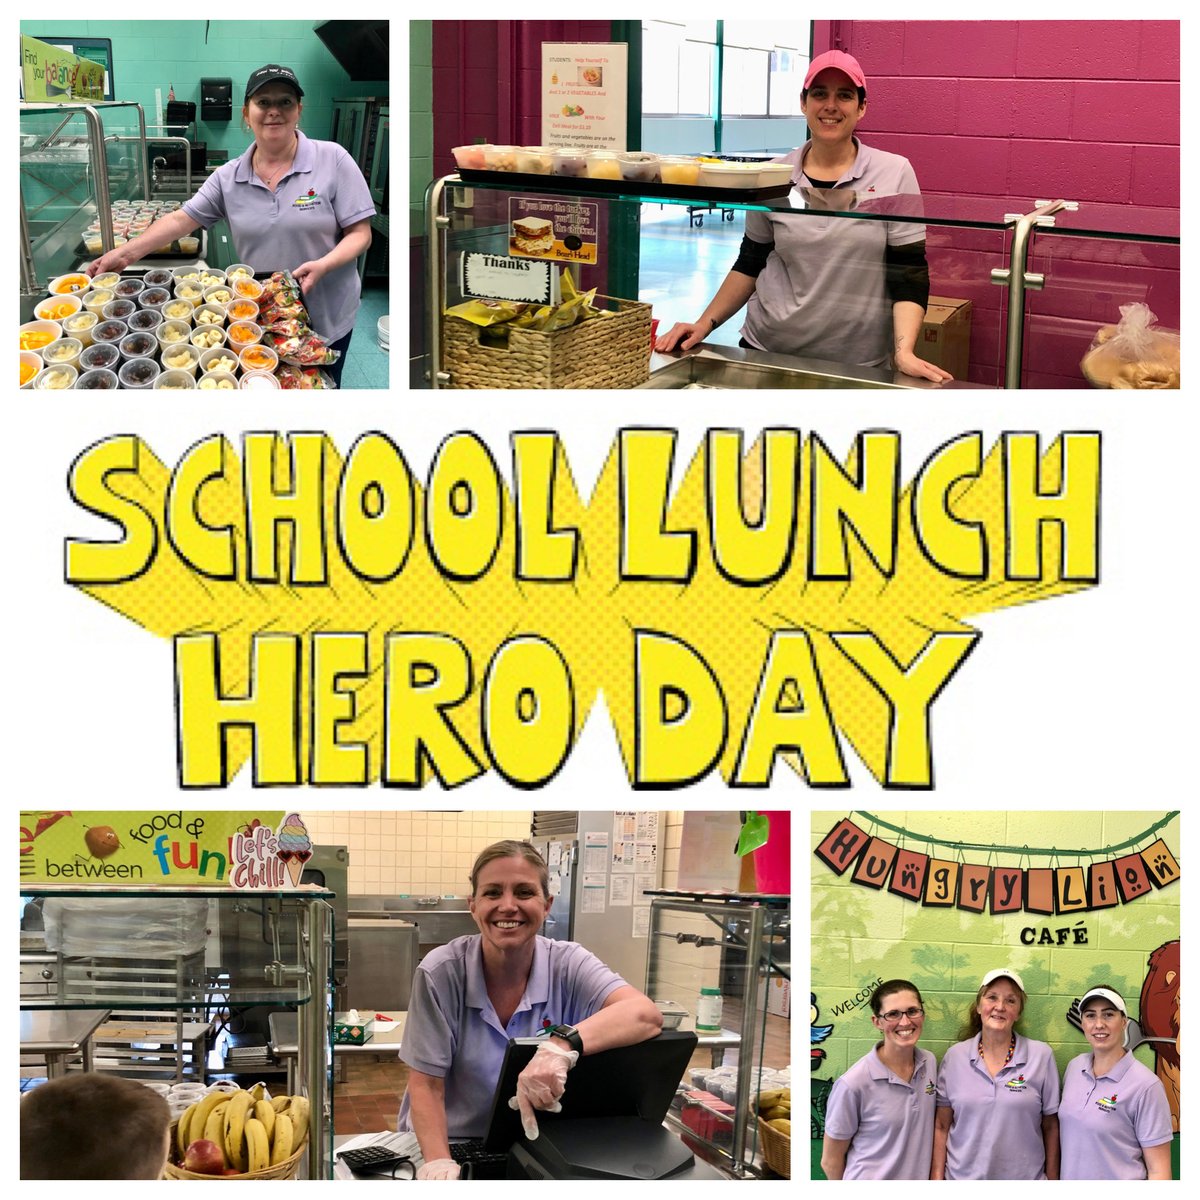 Today is School Lunch Hero Day so we are celebrating the amazing ladies who feed the New Milford Public School children with smiles every day. Thanks for all you do! @nmps_supt @HPS_CT @NES_CT @SNIS_CT @SMS_CT @NMHS_CT #SchoolLunchHeroDay